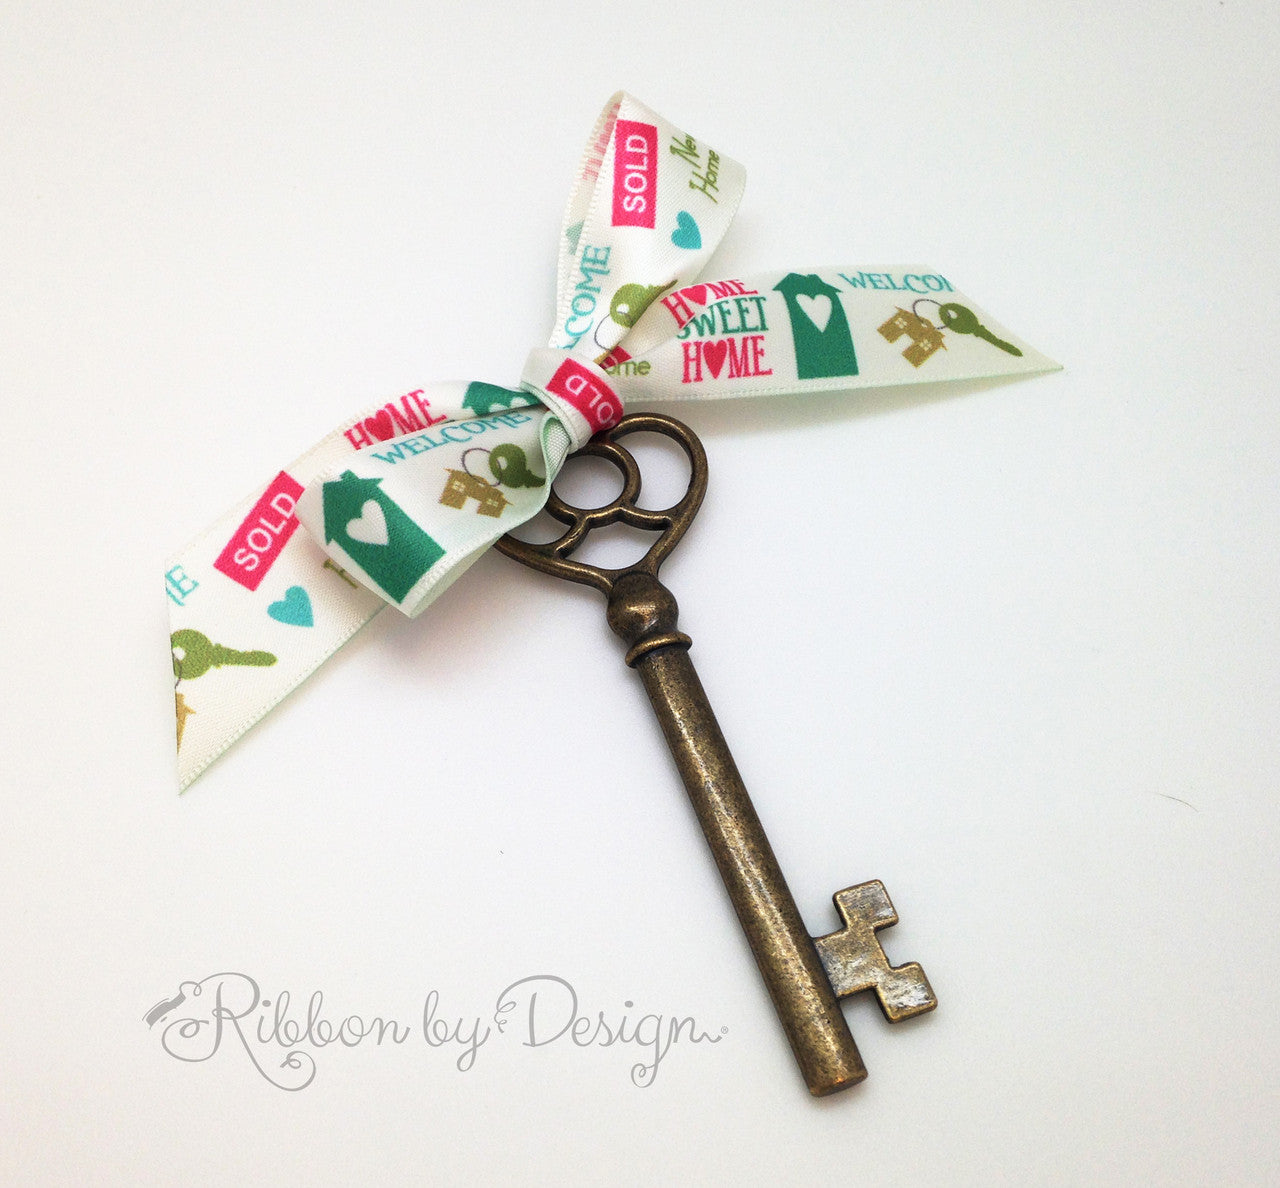 Home Sweet Home! Our welcome home ribbon is the perfect tie for the keys to a new home!